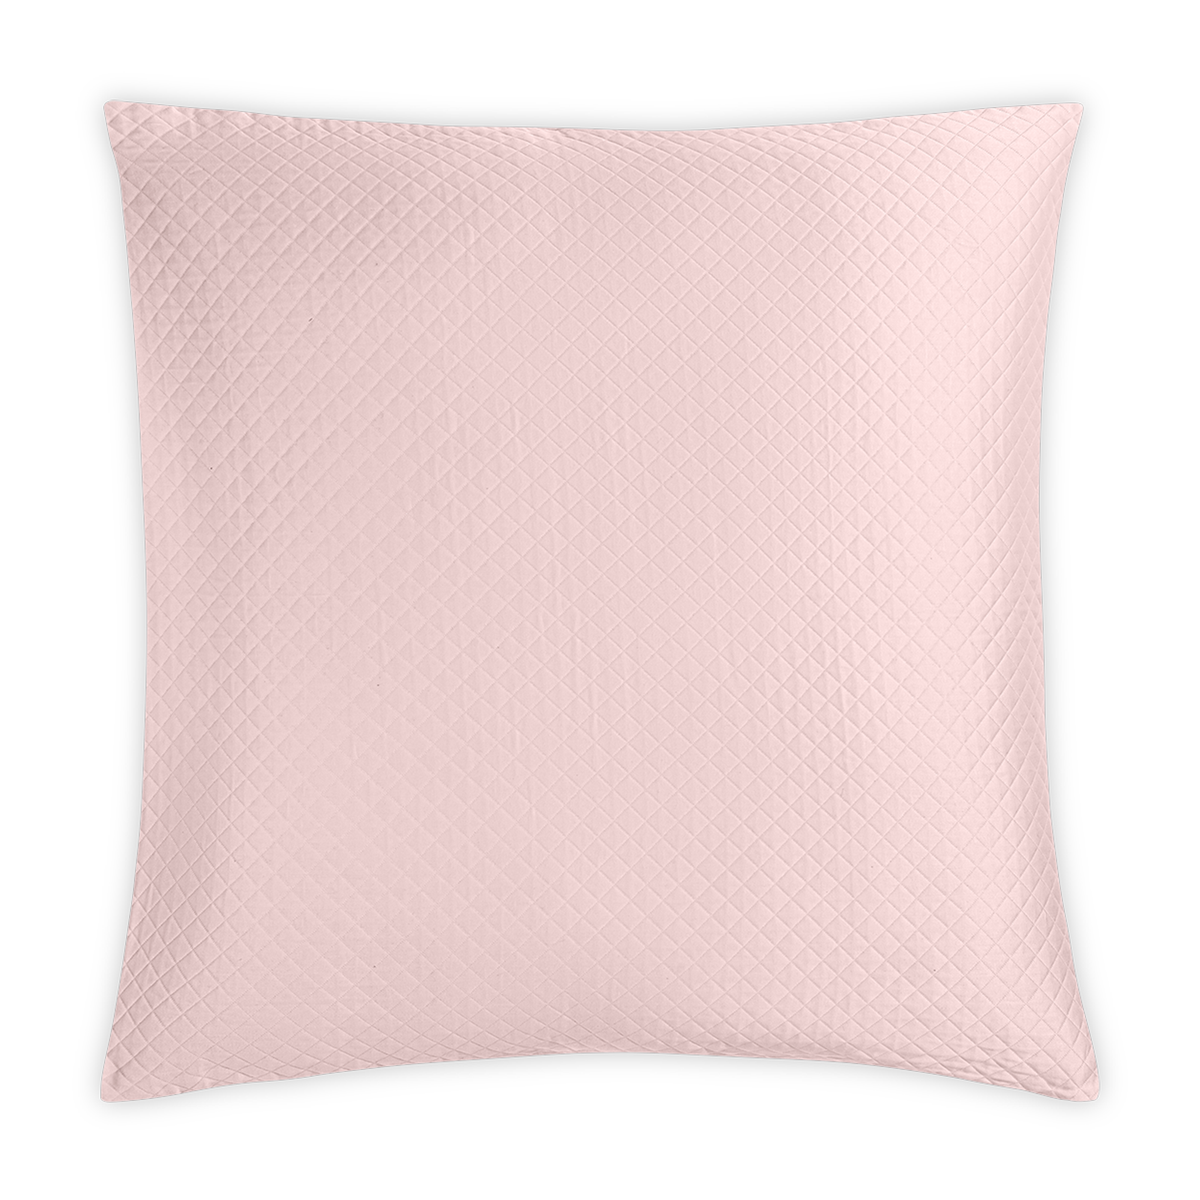 Euro Sham of Matouk Petra Bedding in Color Pink